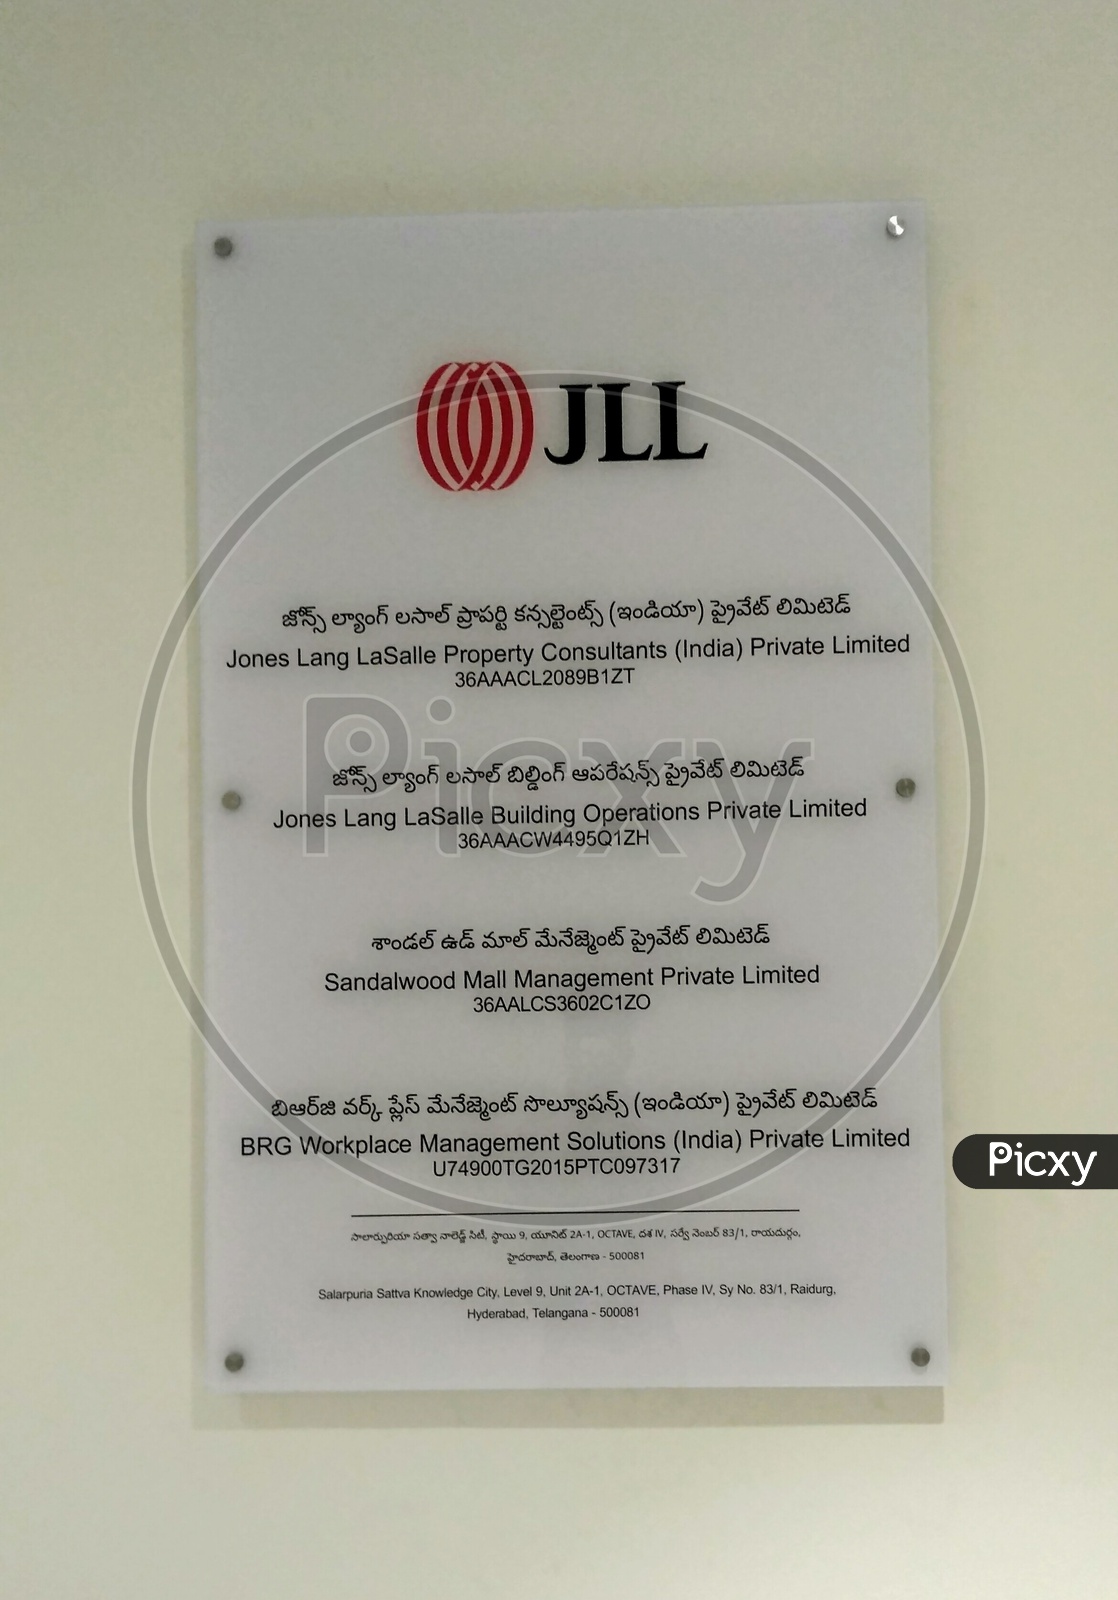 JLL Hyderabad or Jones Lang LaSalle Property Consultants (India) Private Limited